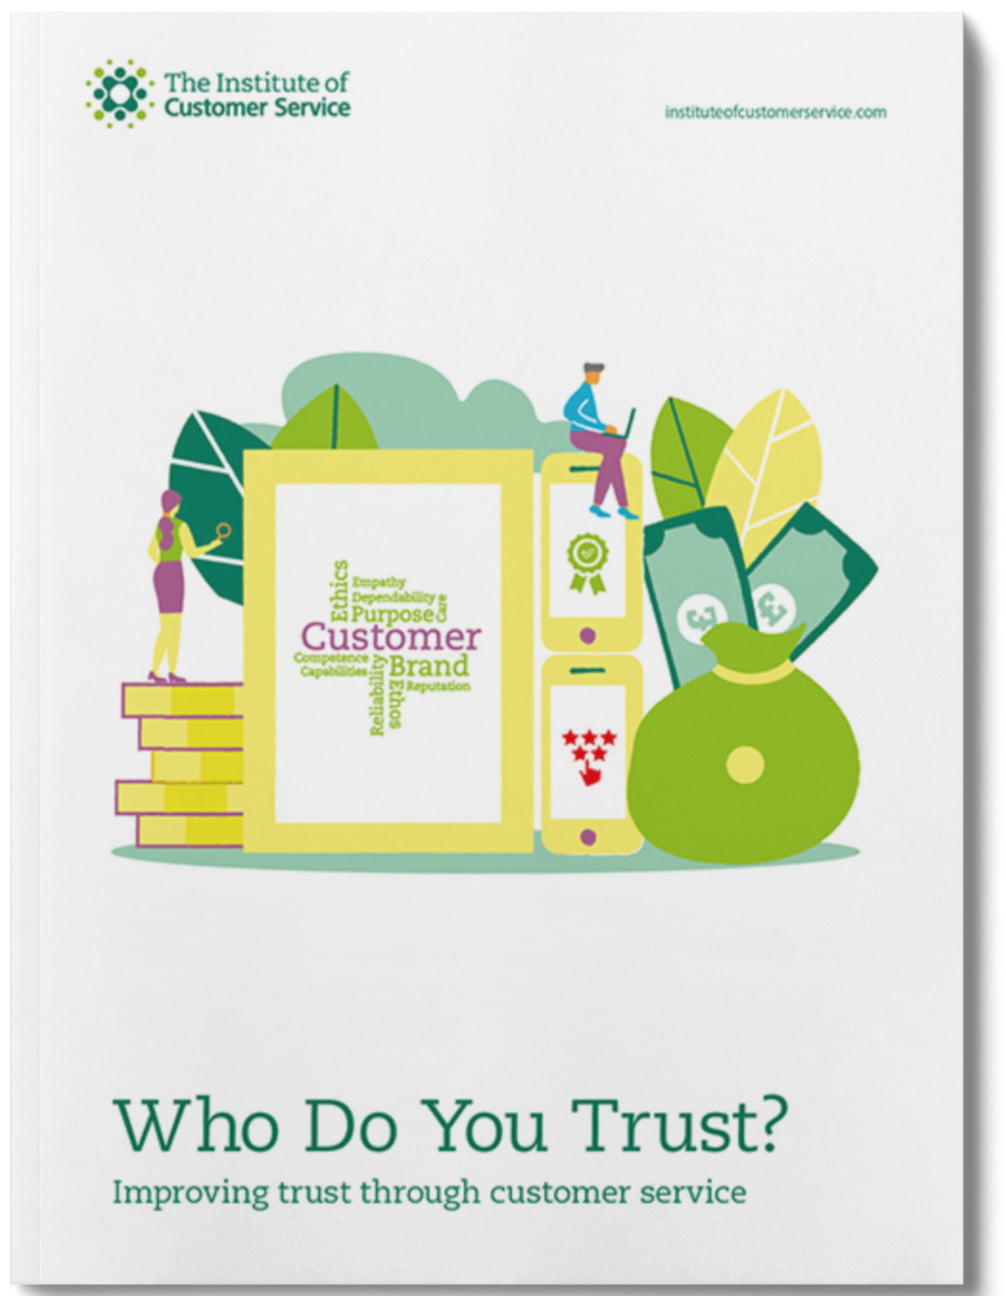 Who Do You Trust? Improving trust through customer service